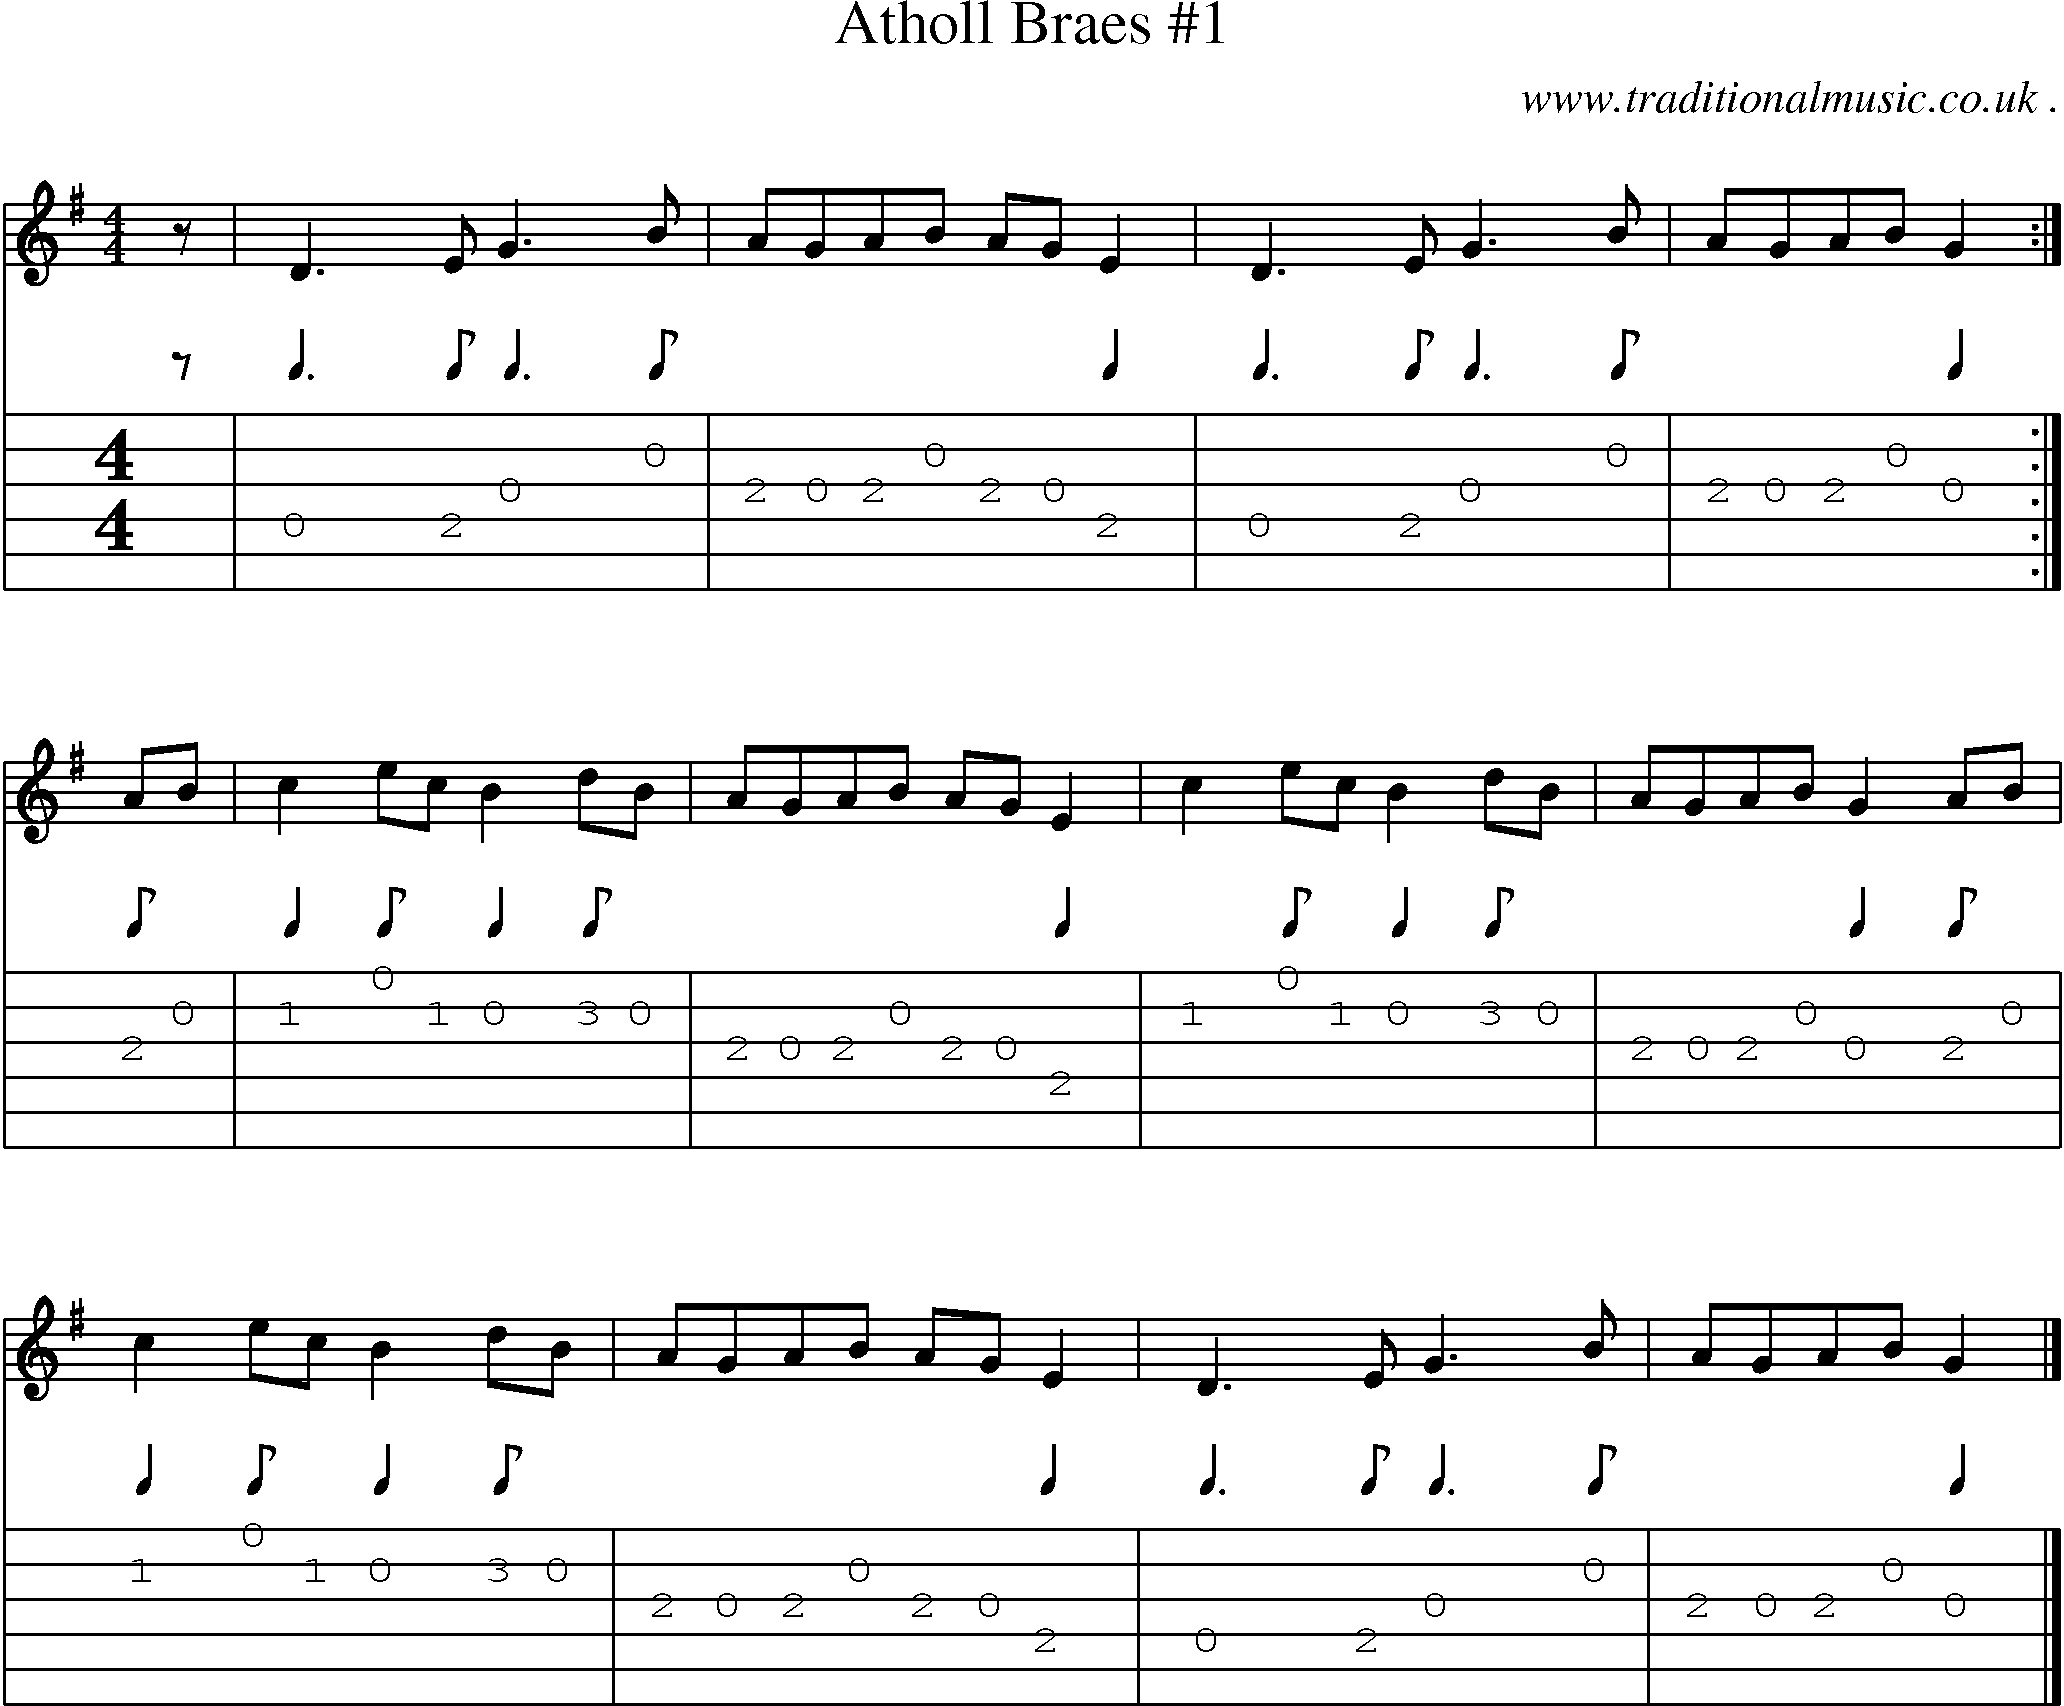 Sheet-music  score, Chords and Guitar Tabs for Atholl Braes 1